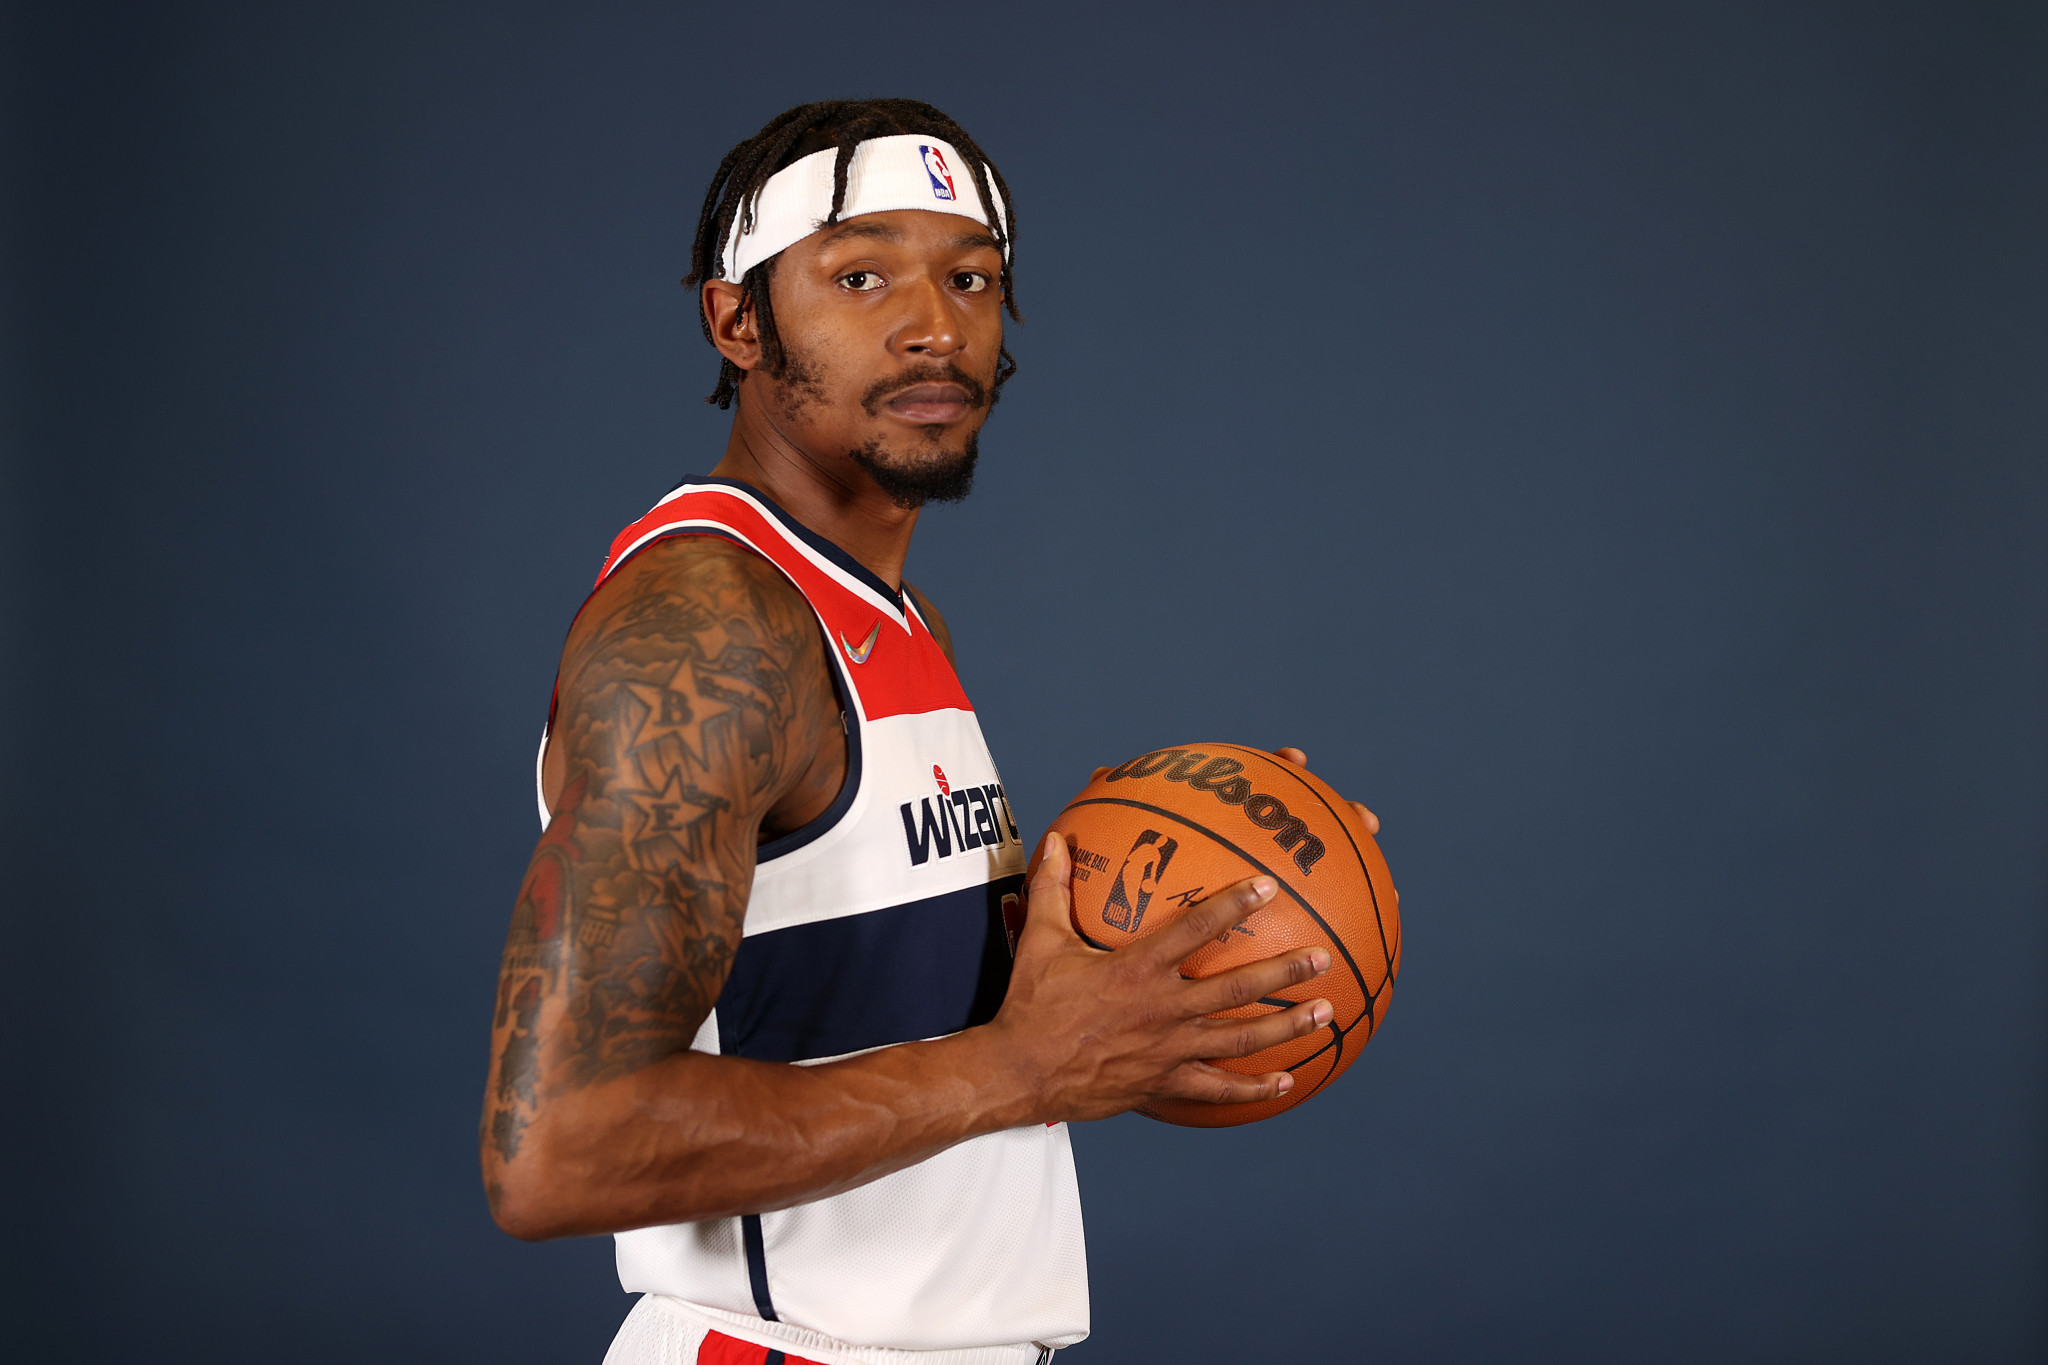 Washington Wizards' player Bradley Beal has said he will not take the COVID-19 vaccine, questioning its efficacy ©Getty Images